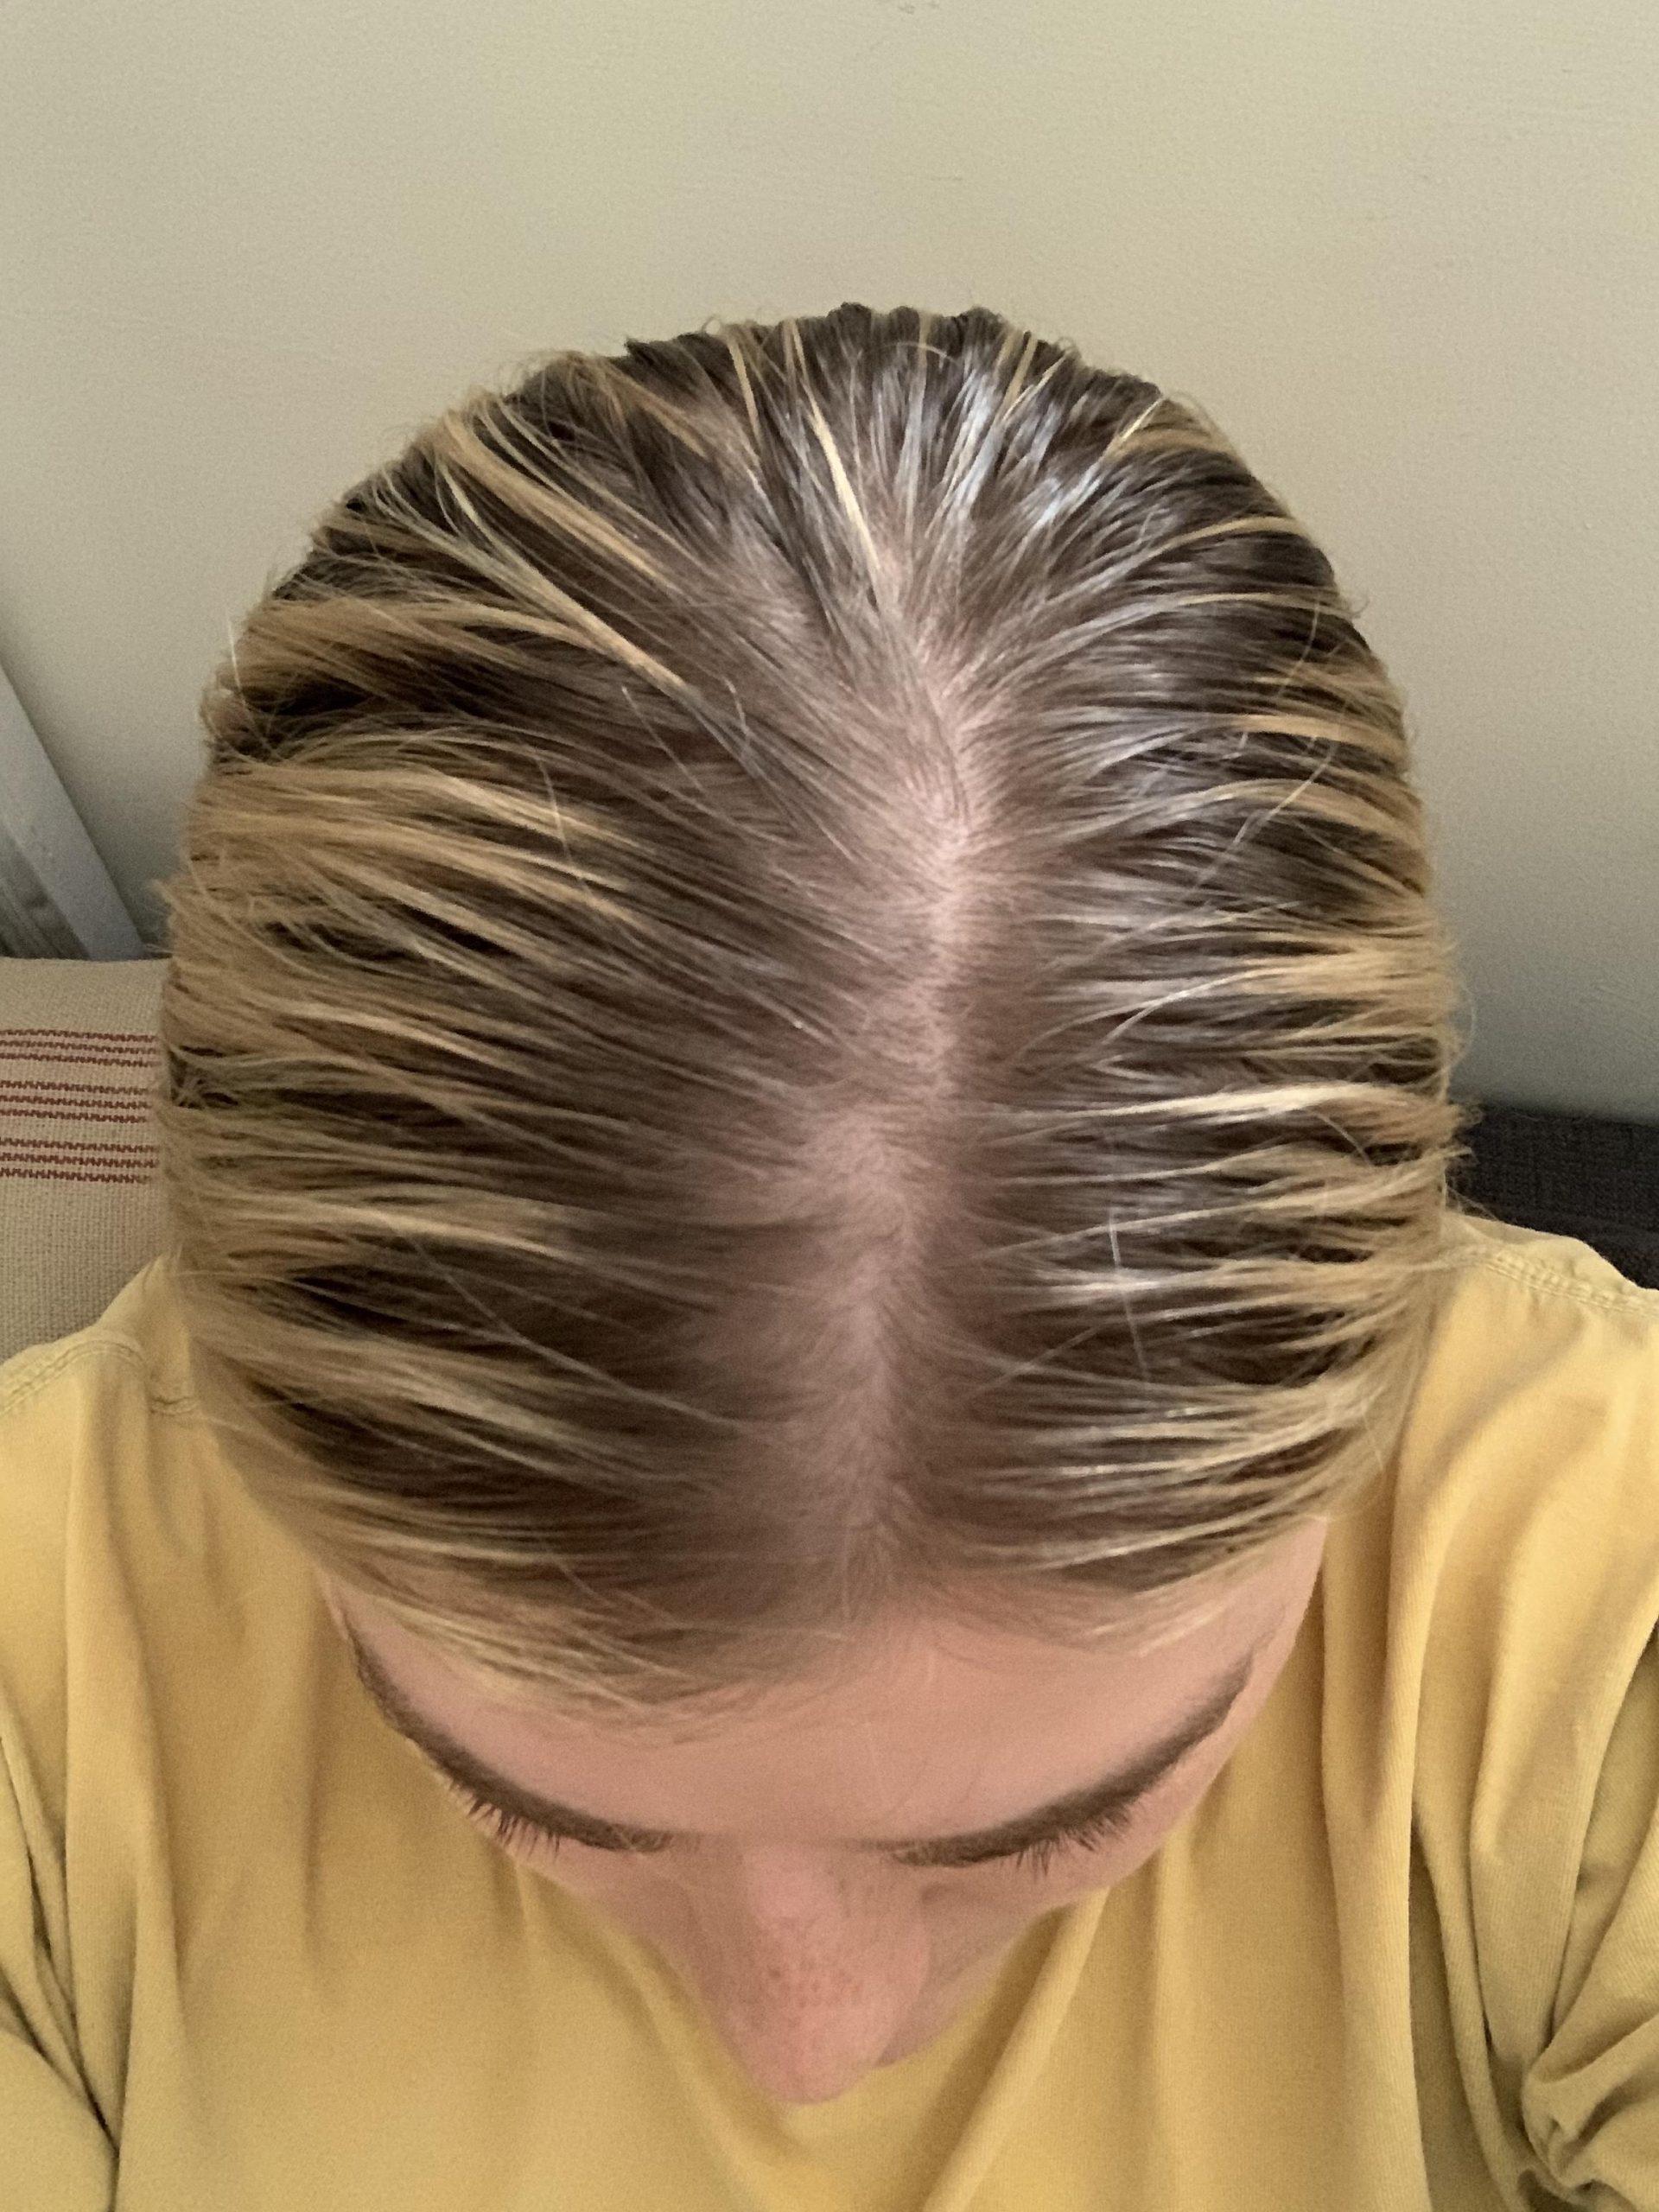 Should I be concerned about this hair loss/thinning ...